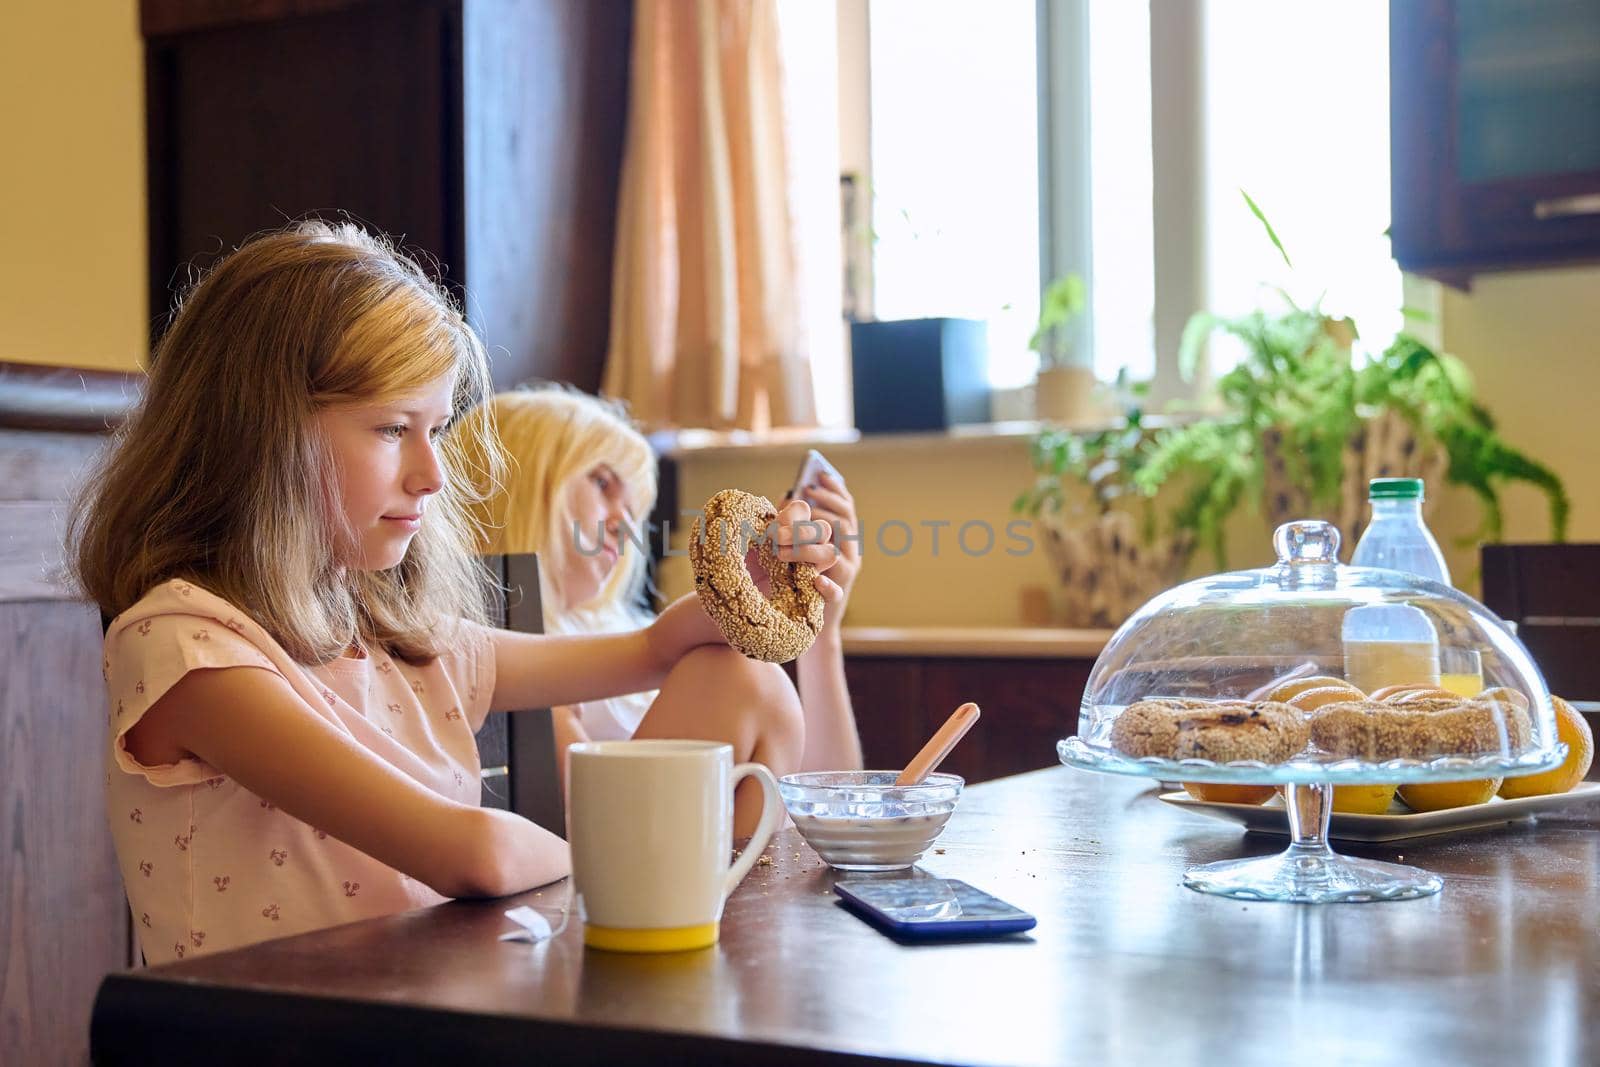 Family, children, two girls, sisters eating at home. Teenagers having breakfast in kitchen, milk fruit snacks on table, older girl with smartphone. Adolescence, home everyday life, real life, lifestyle